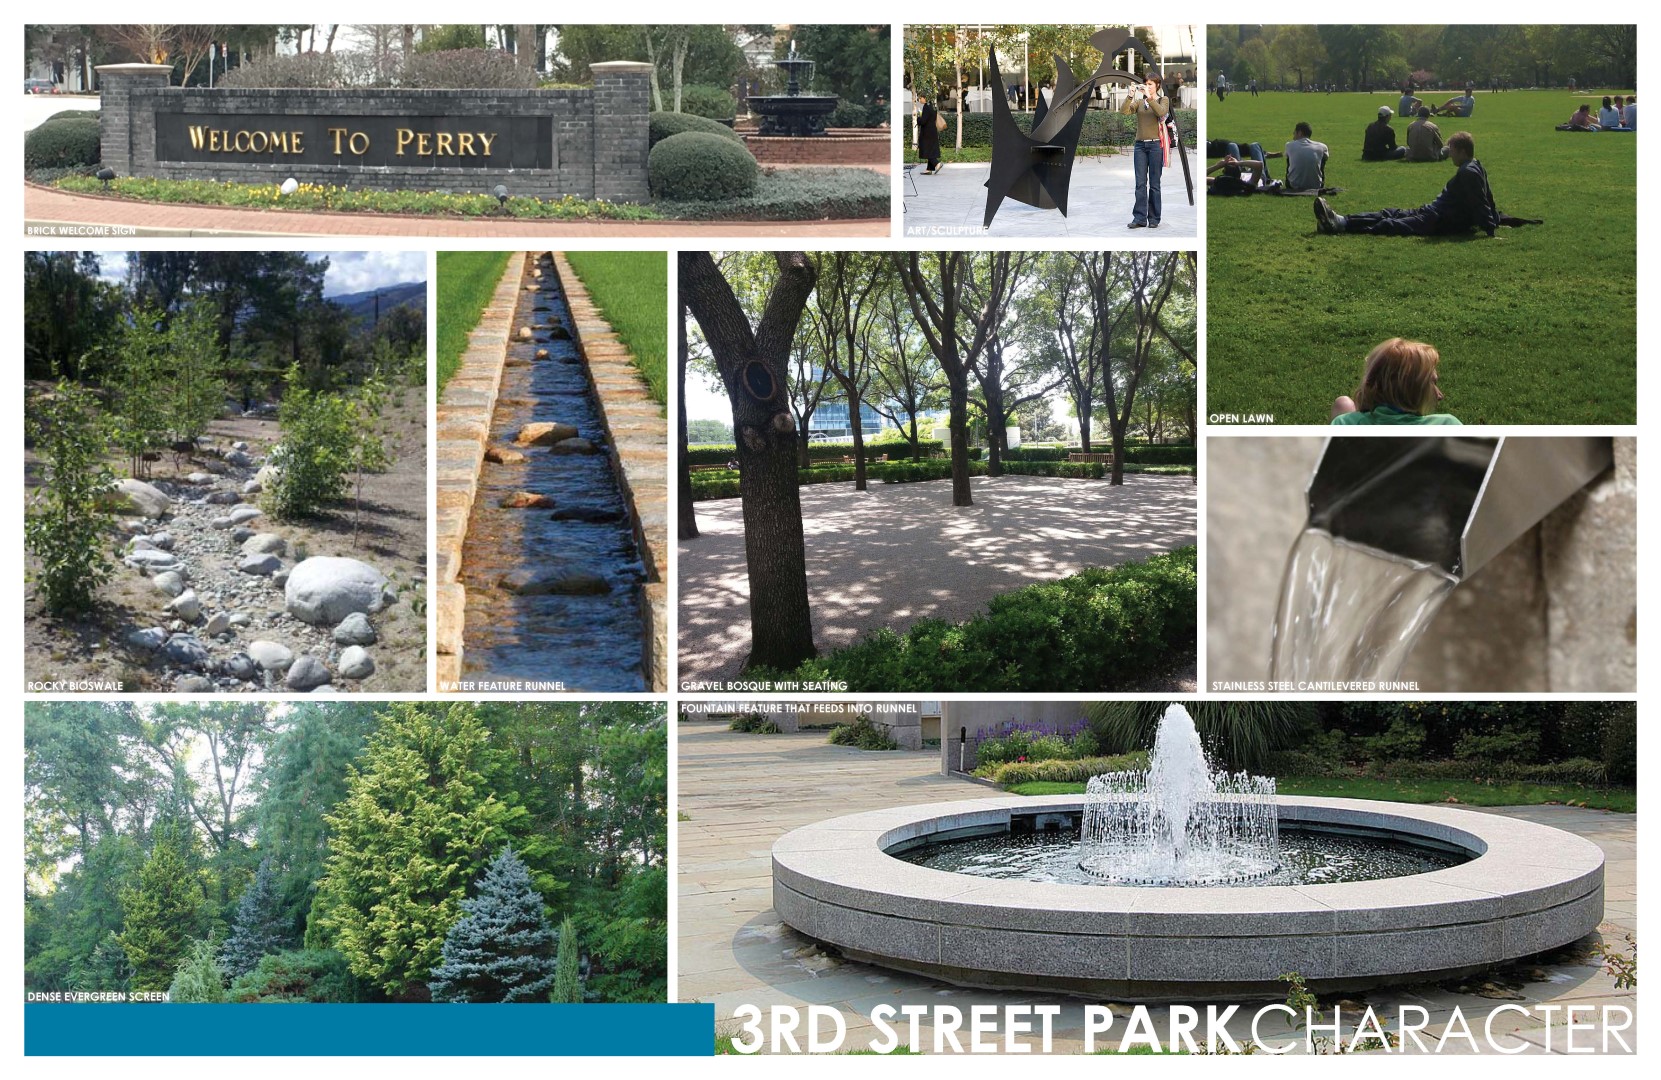 City of Perry: 3rd Street Park